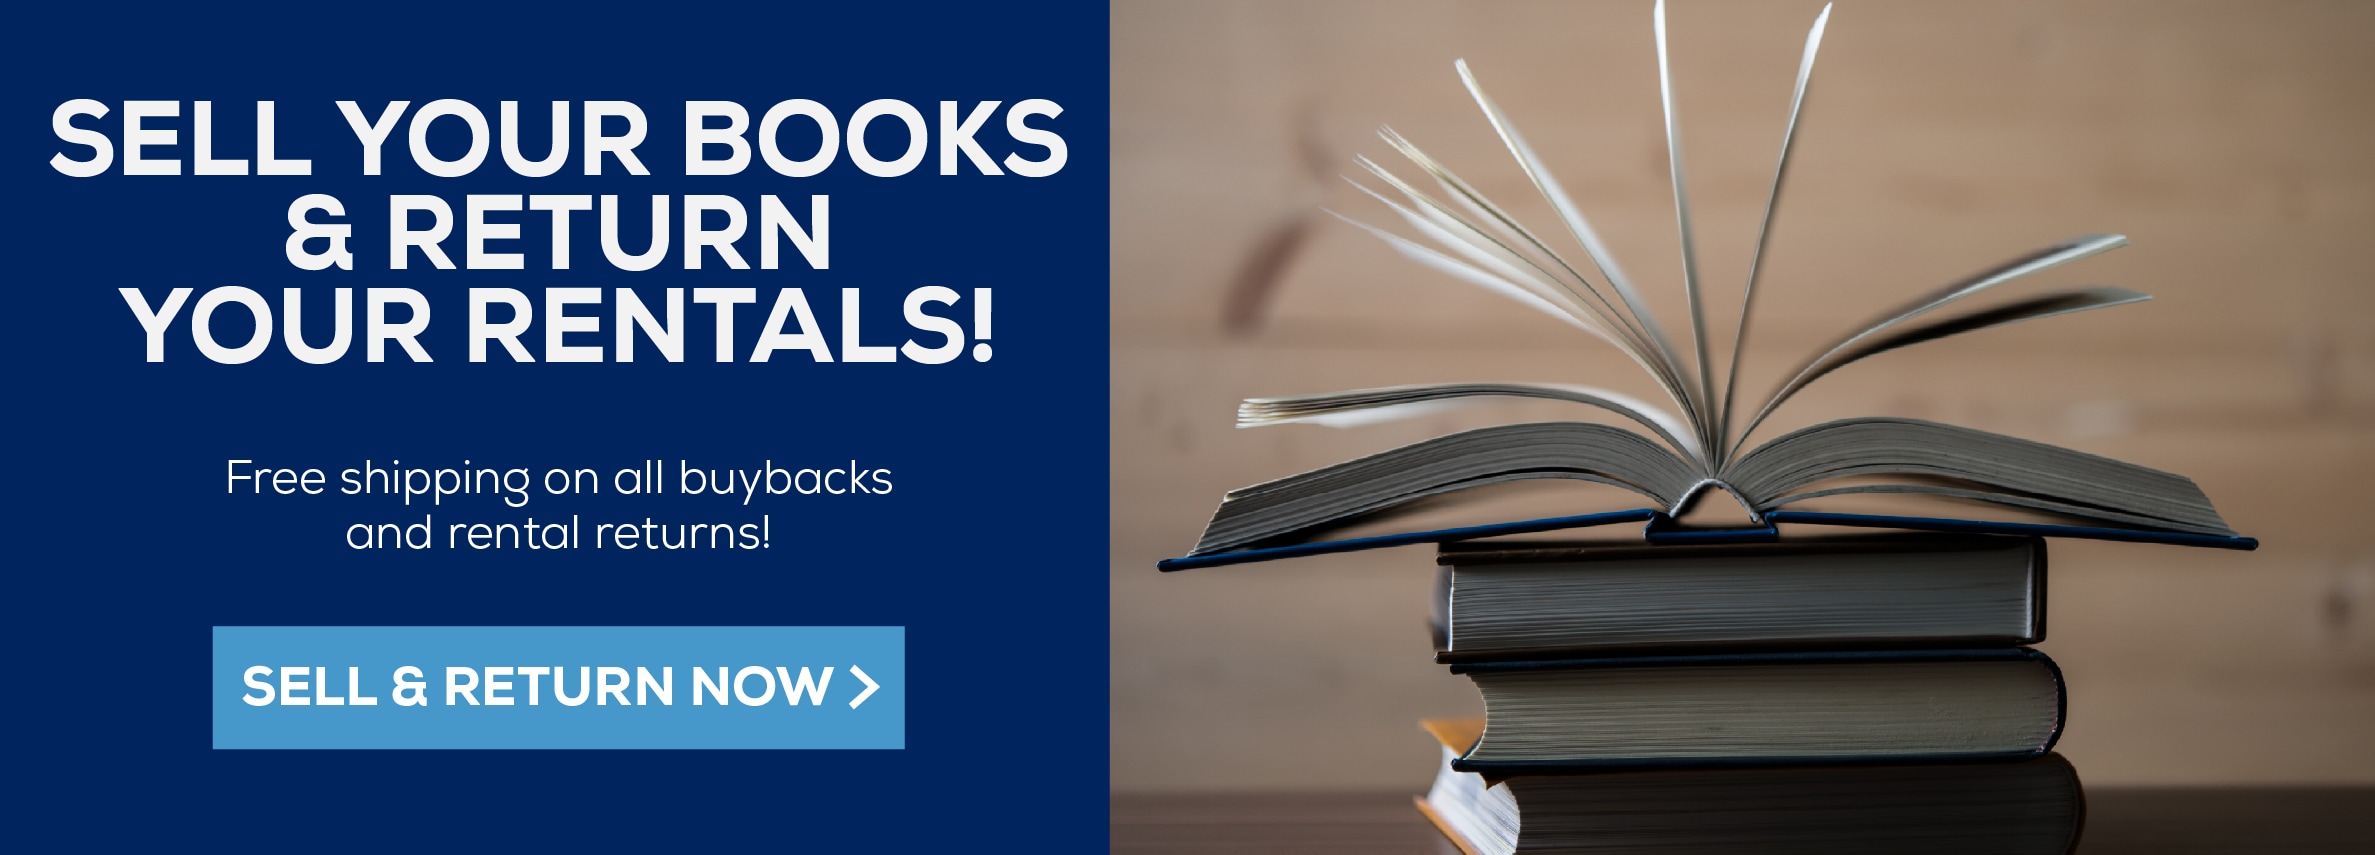 Sell books and return rentals online! Free shipping on all buybacks and rental returns! Sell & Return Now.